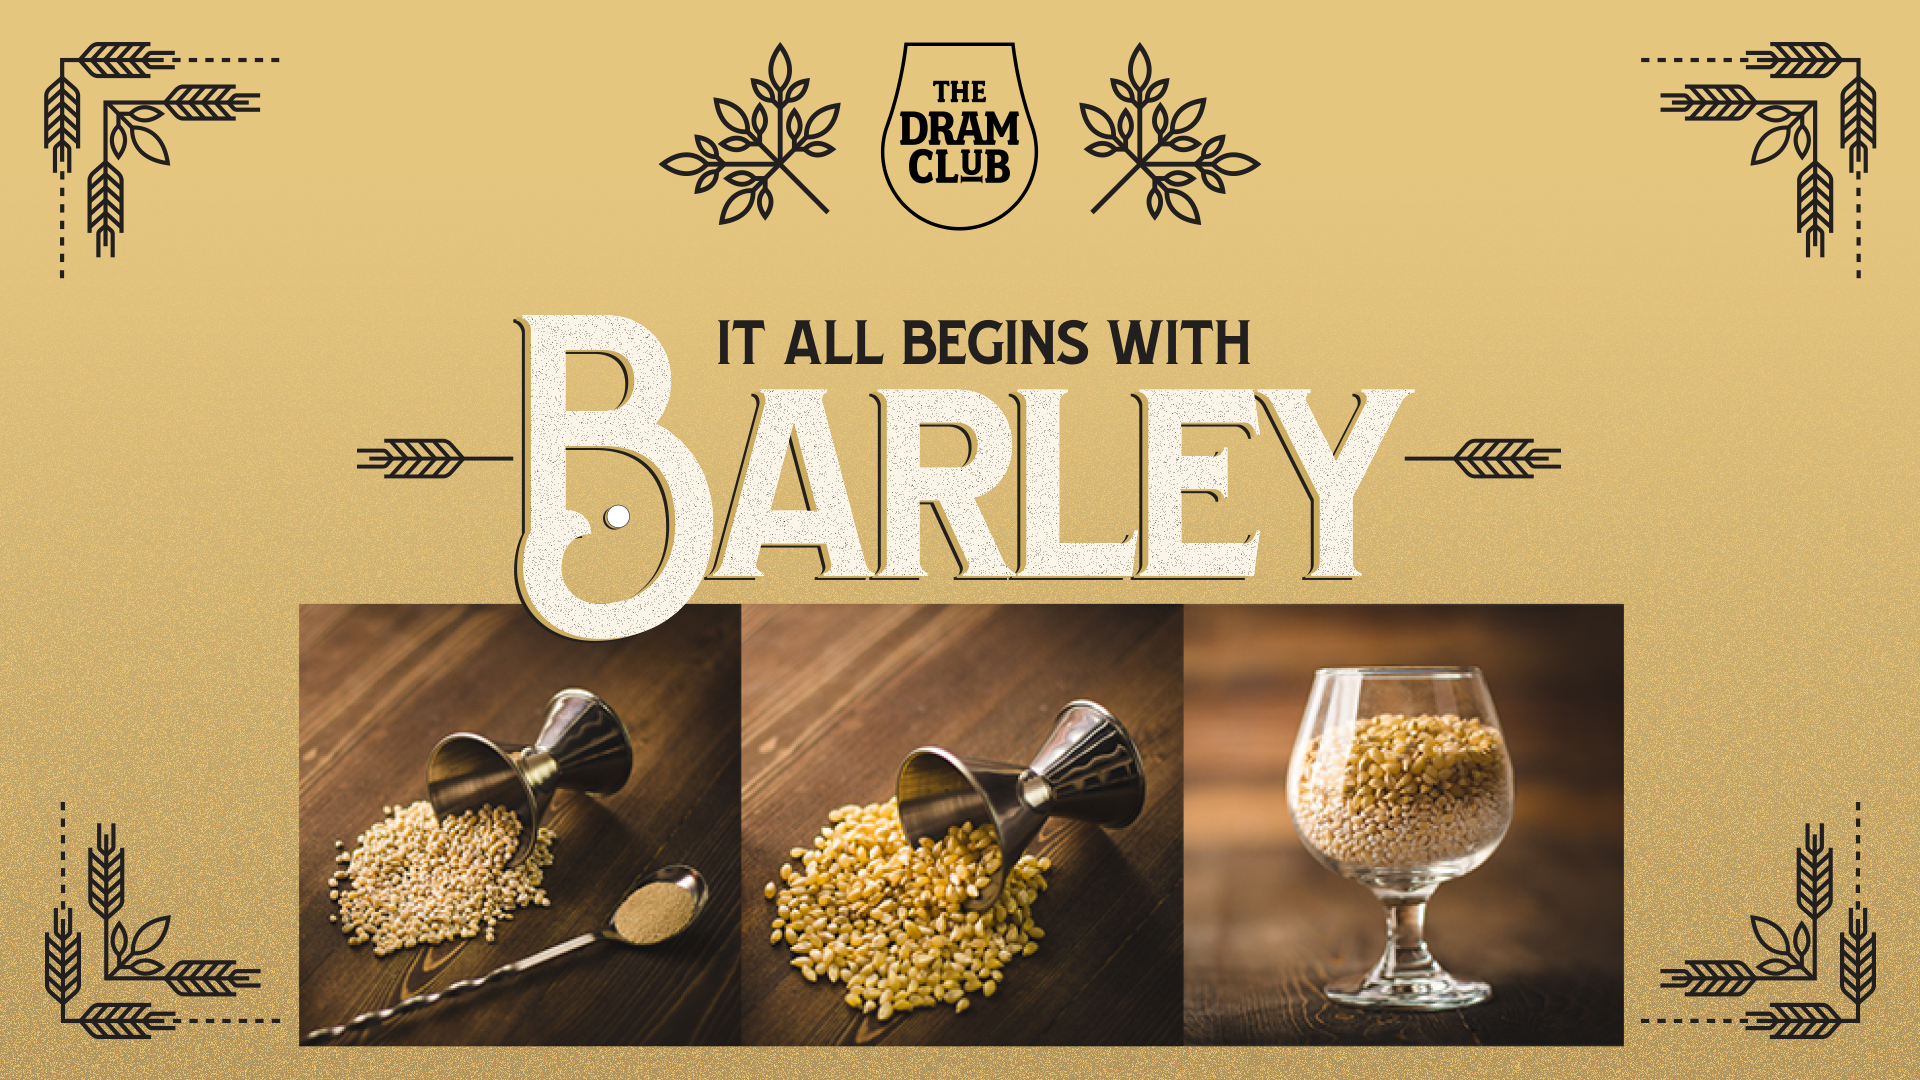 Its all begins with Barley